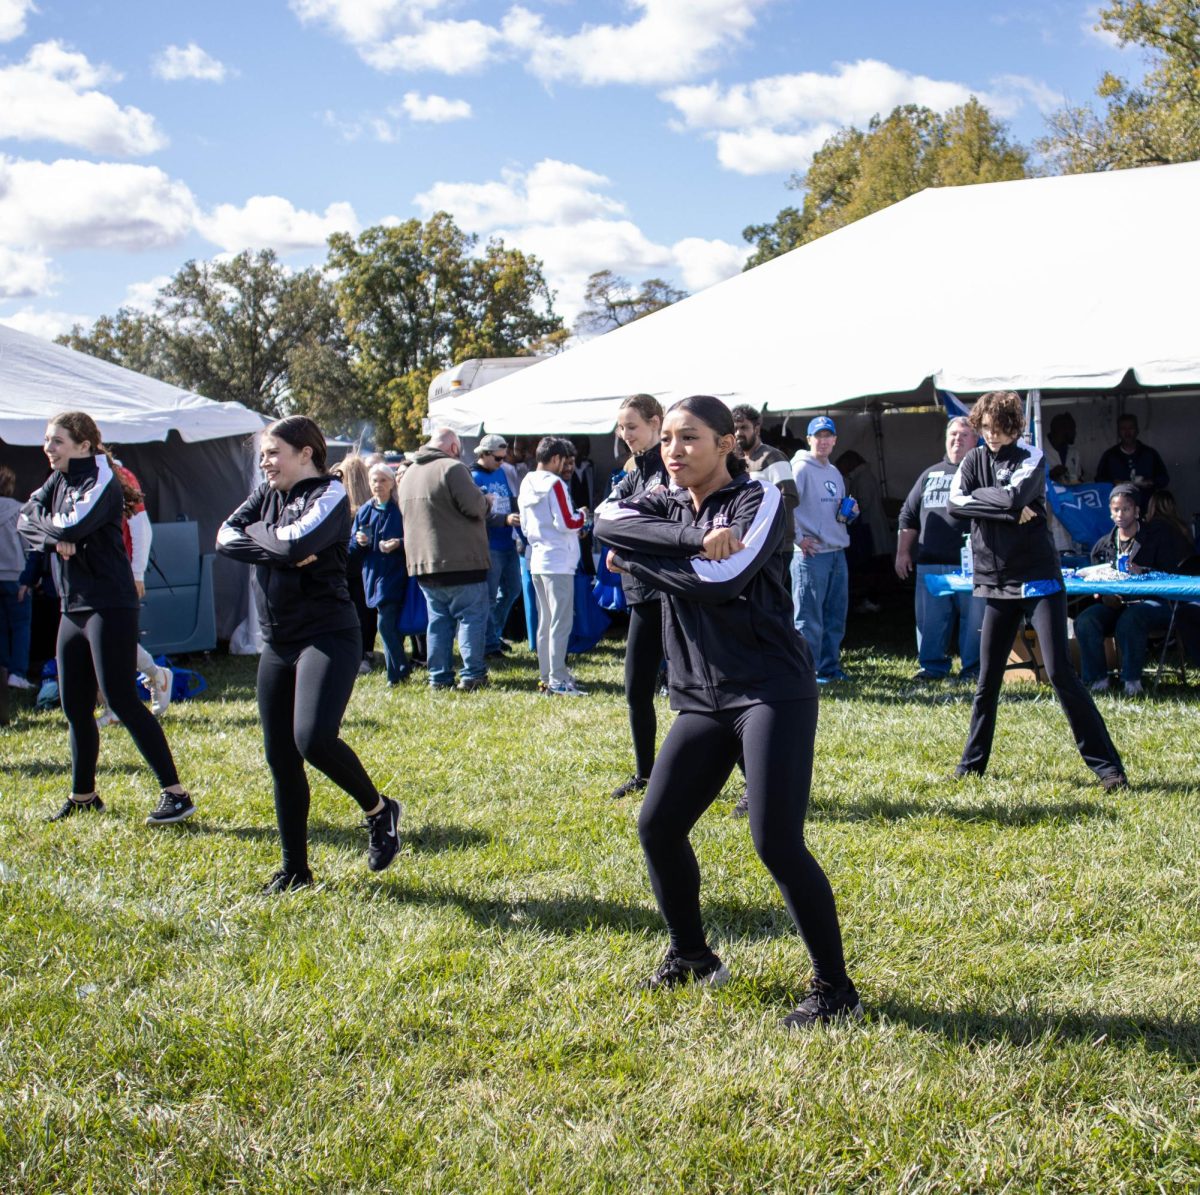 The EIU Dancers performs at tailgate during Homecoming at Eastern Illinois University campus behind O‘Brien Field Saturday afternoon.